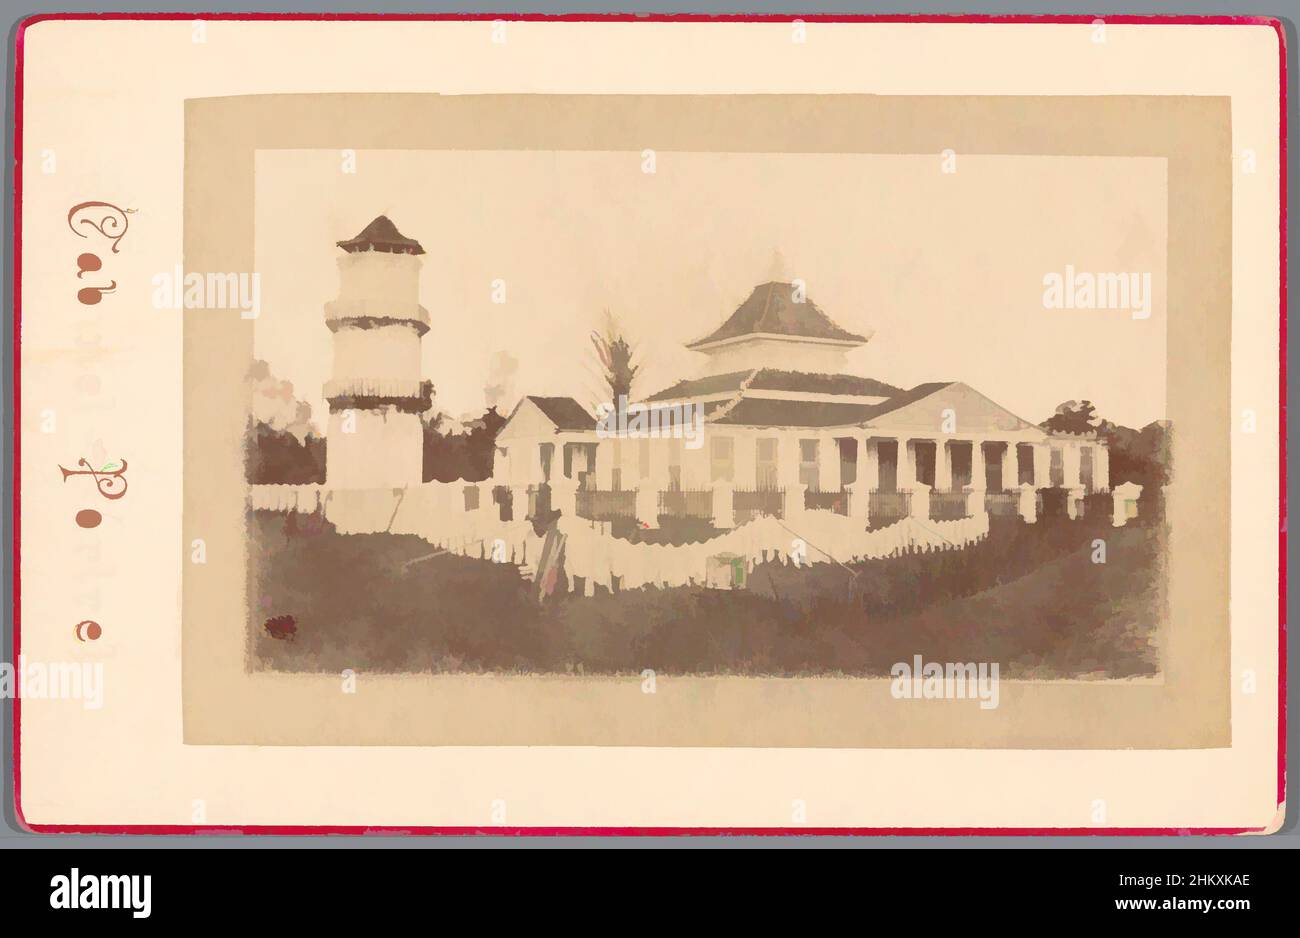 Art inspired by View of unknown white building with tower, Indonesia, Indonesia, c. 1870 - c. 1890, paper, albumen print, Classic works modernized by Artotop with a splash of modernity. Shapes, color and value, eye-catching visual impact on art. Emotions through freedom of artworks in a contemporary way. A timeless message pursuing a wildly creative new direction. Artists turning to the digital medium and creating the Artotop NFT Stock Photo